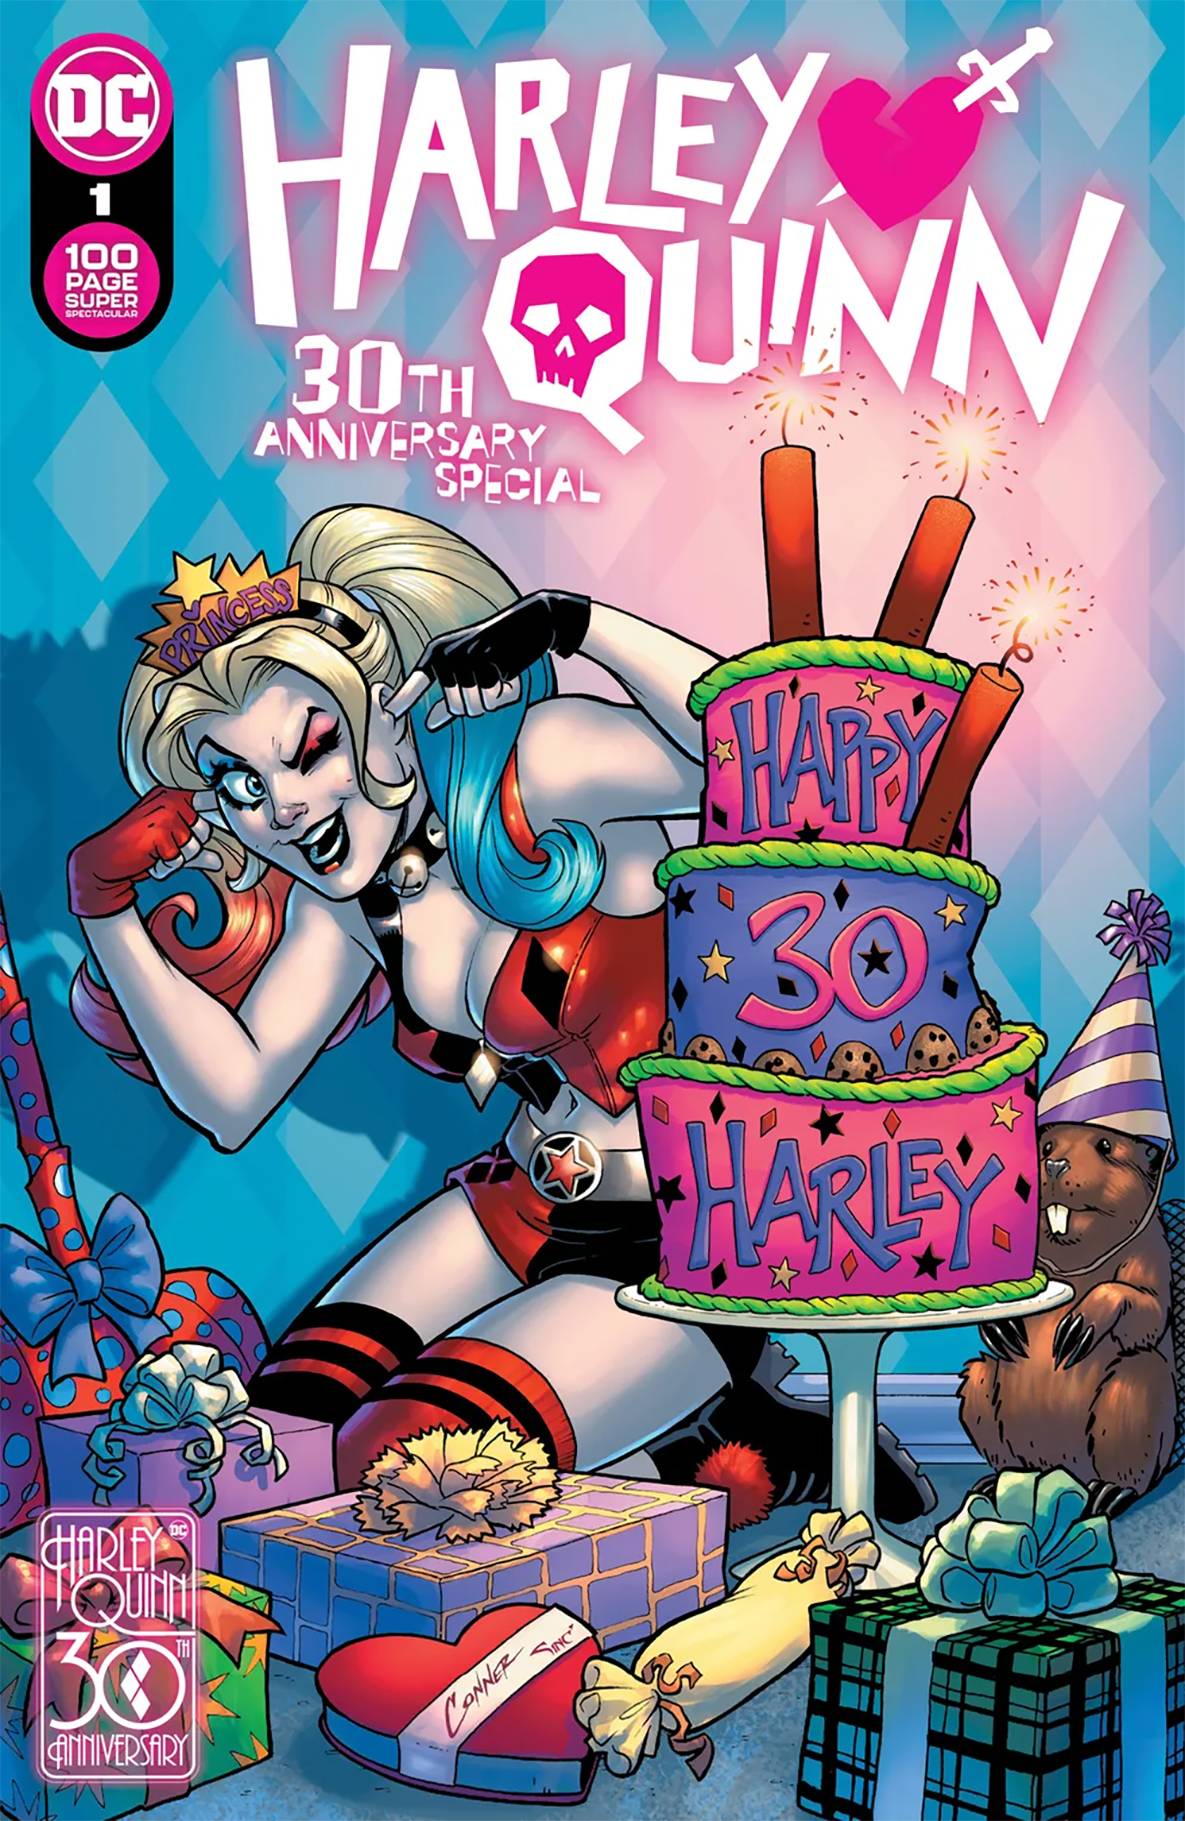 HARLEY QUINN 30TH ANNIVERSARY SPECIAL #1 SIGNED BY TERRY & RACHEL DODSON